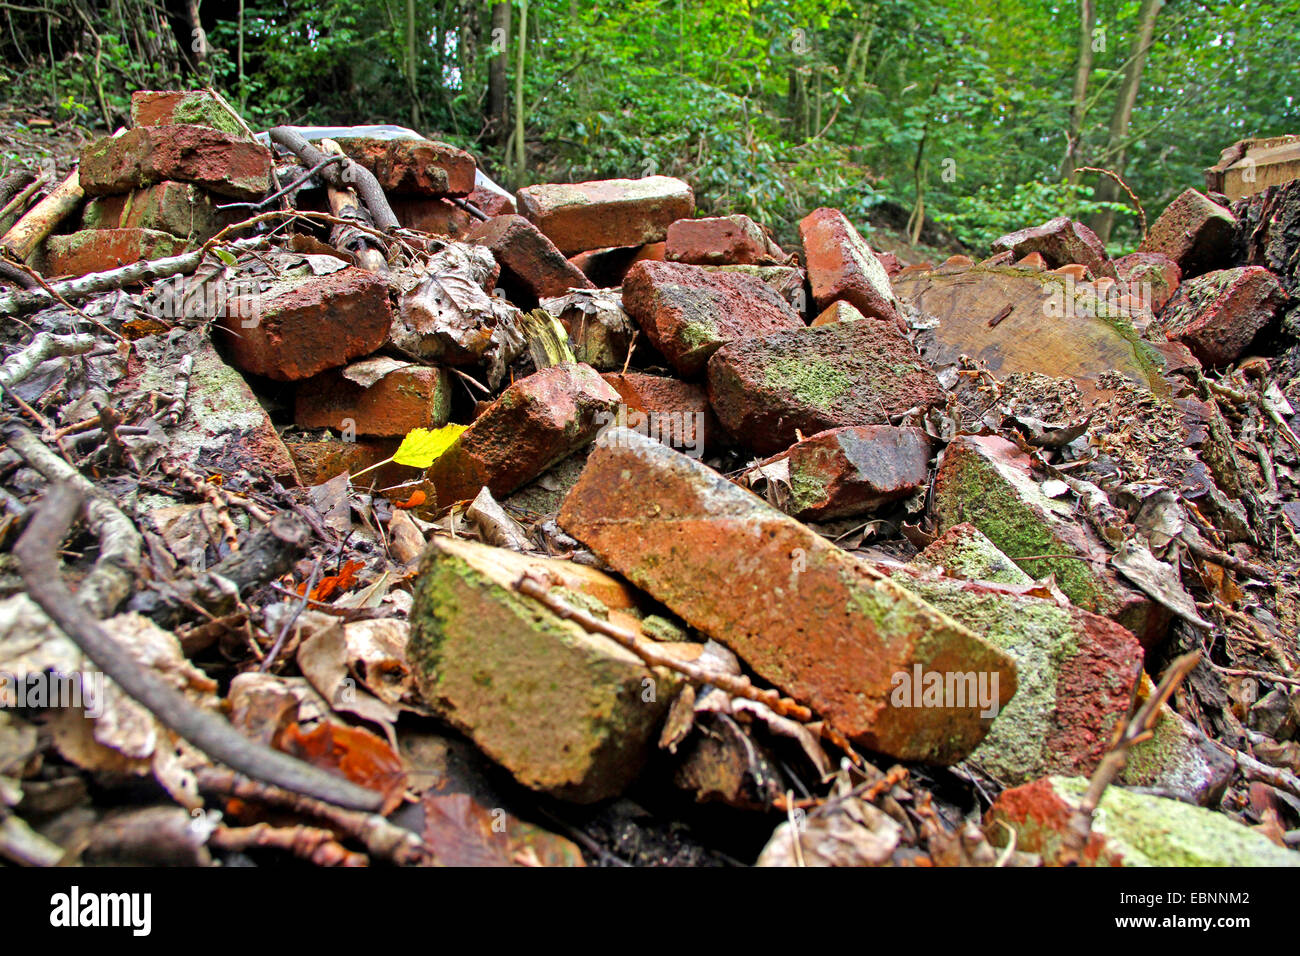 illegal construction rubble in a forest Stock Photo